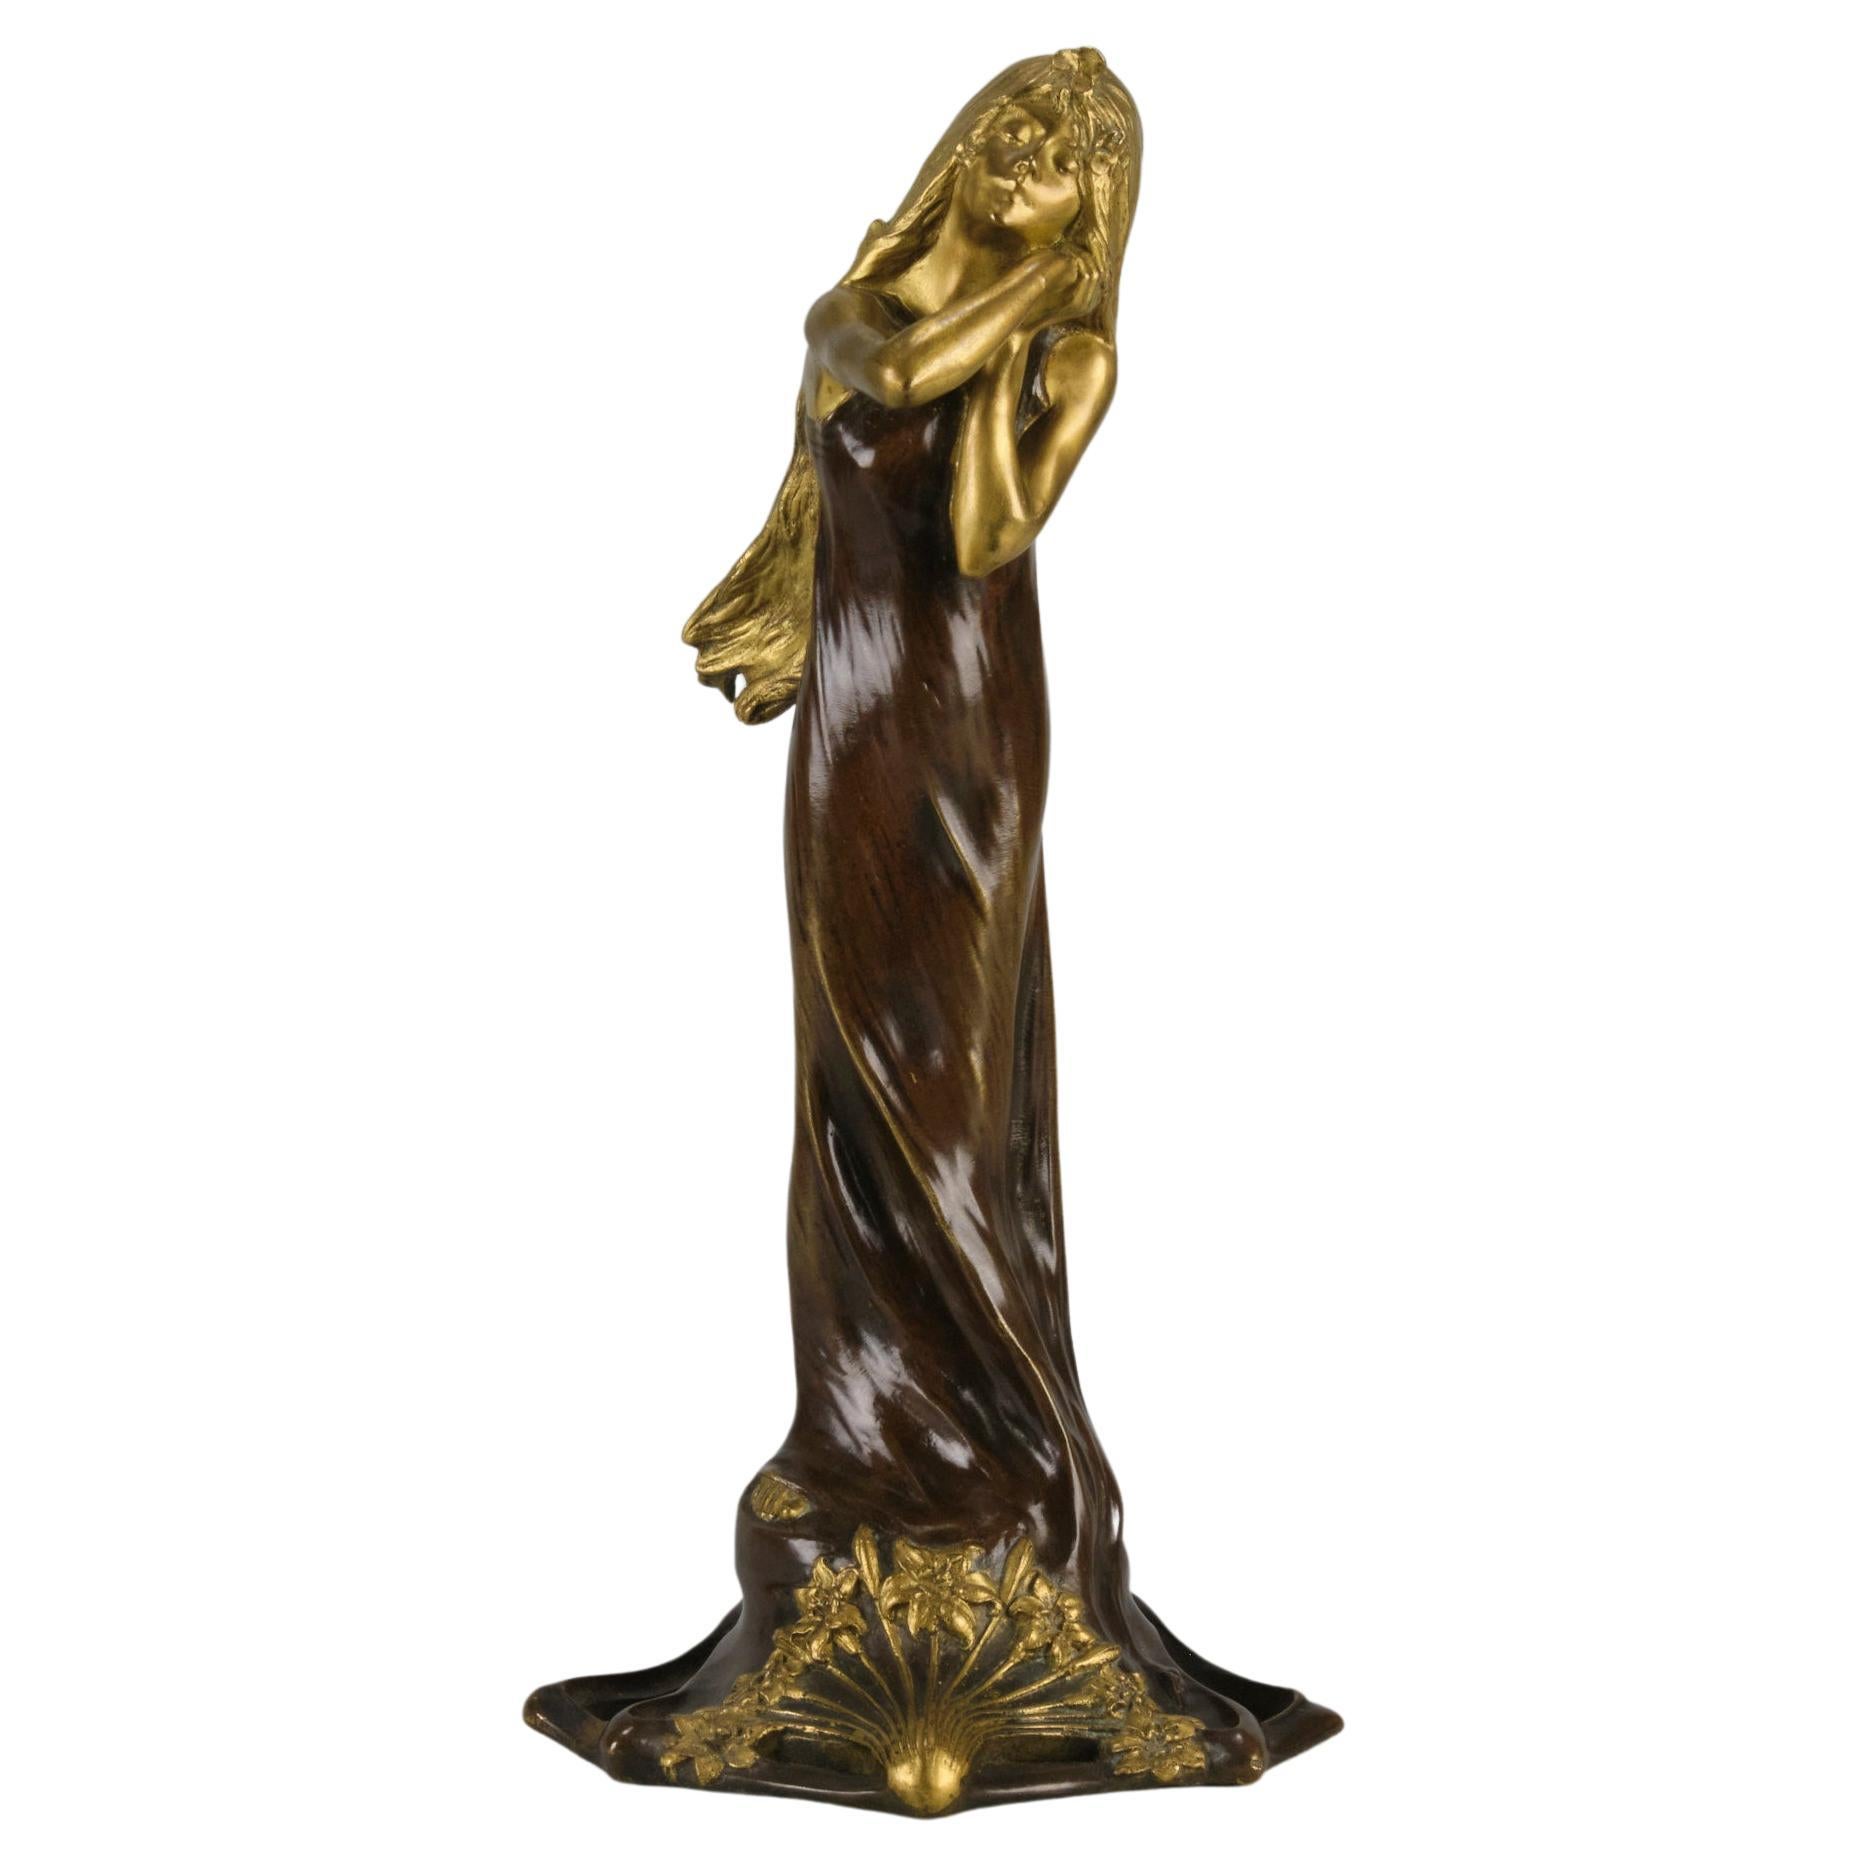 Early 20th Century Bronze Entitled “Jeune Femme” by C Peyre